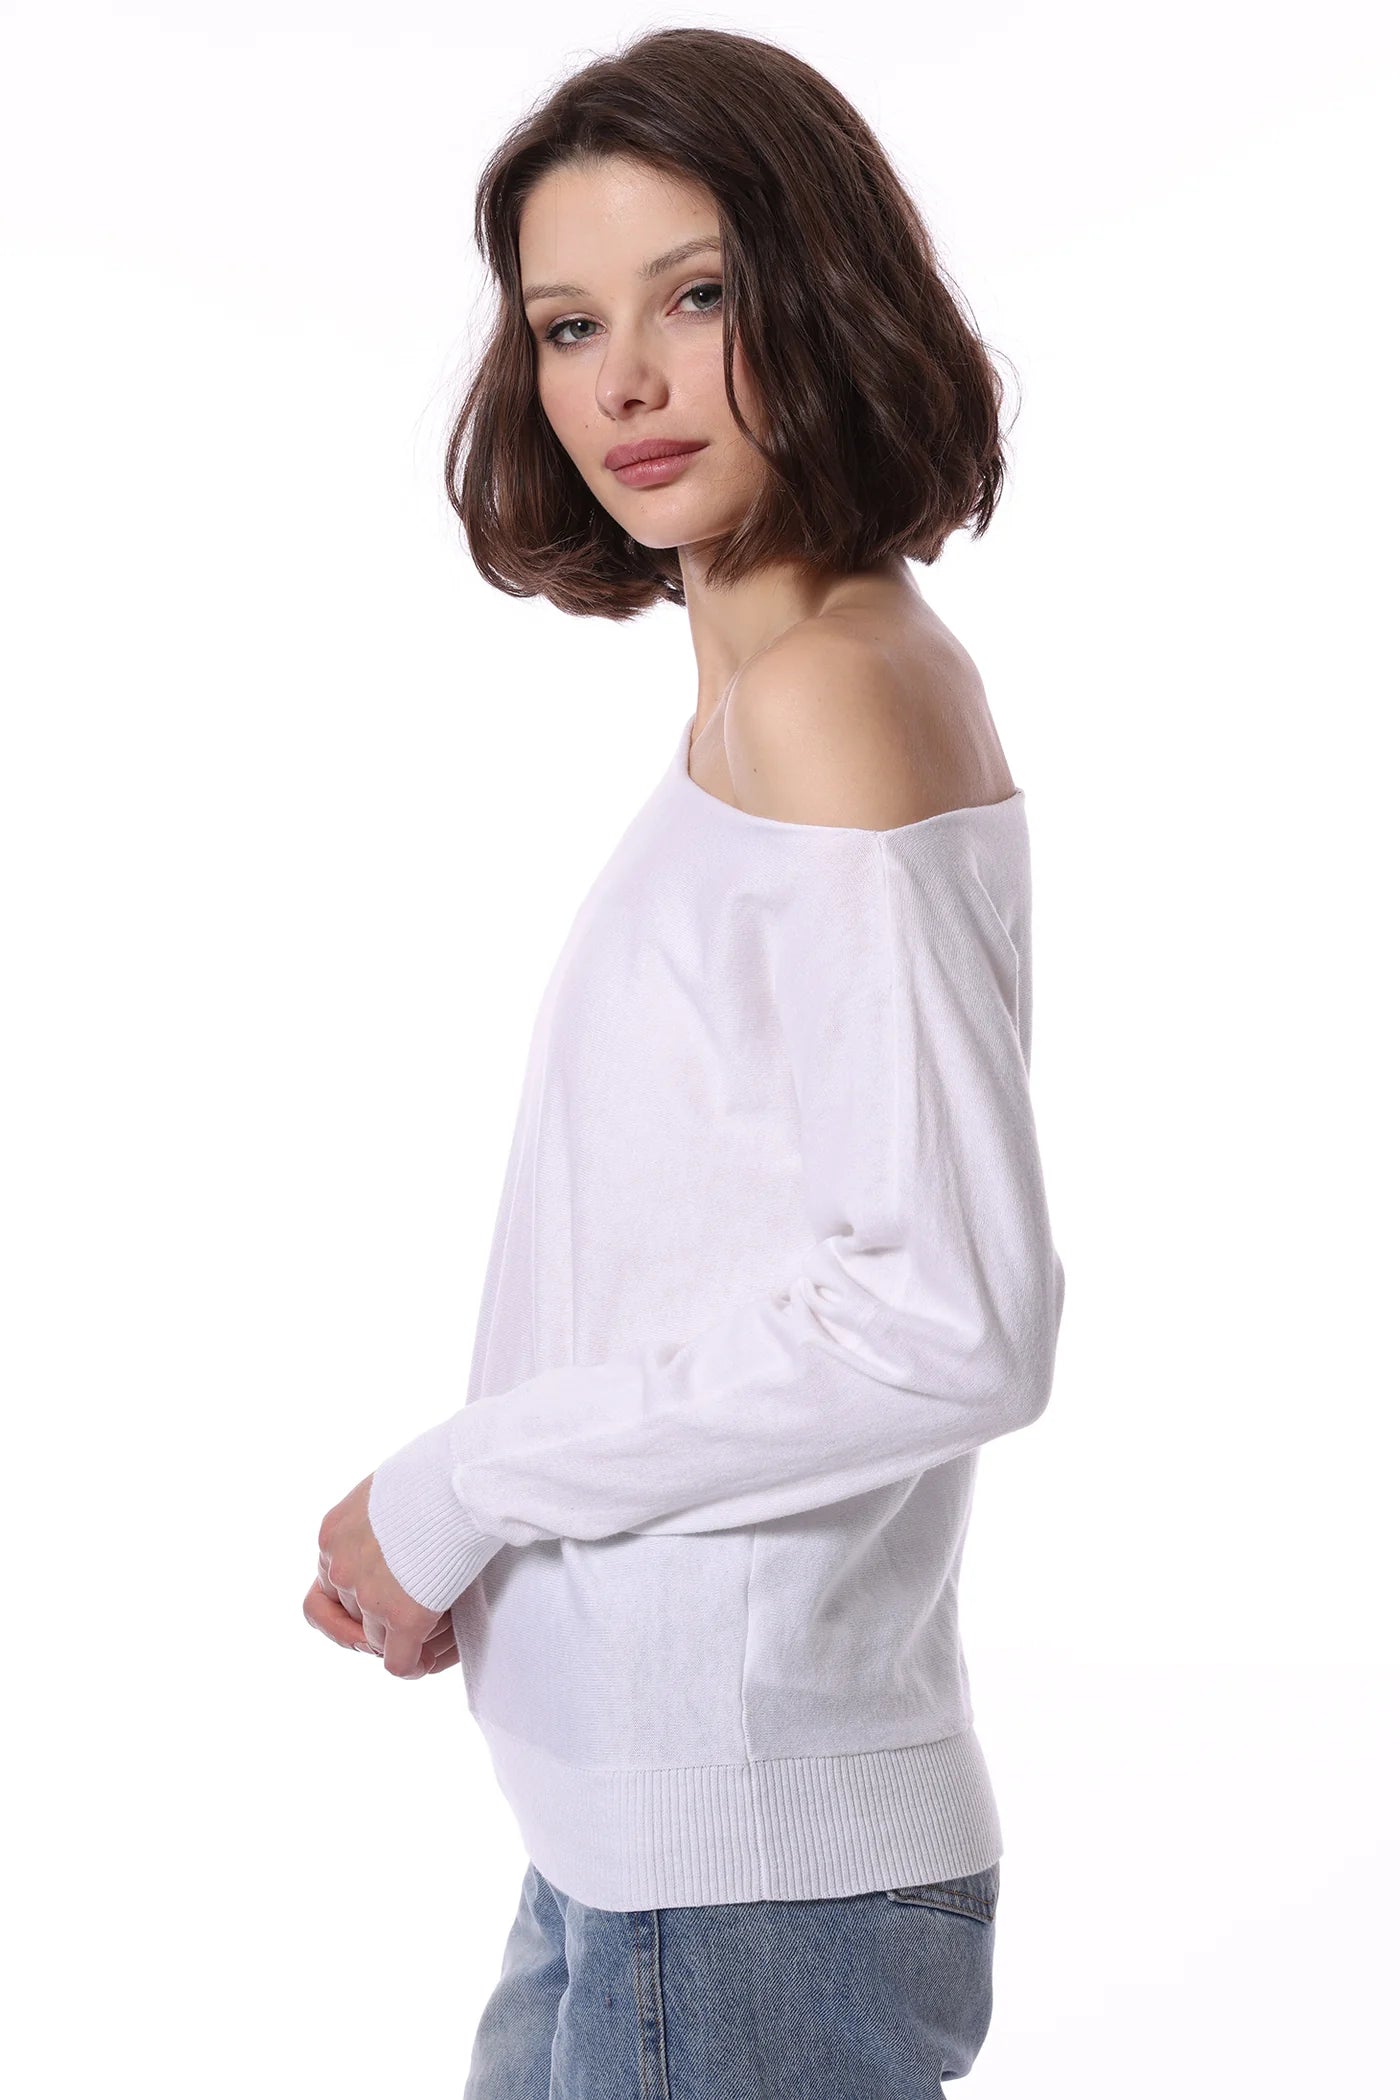 COTTON CASHMERE OFF THE SHOULDER TOP IN WHITE - Romi Boutique